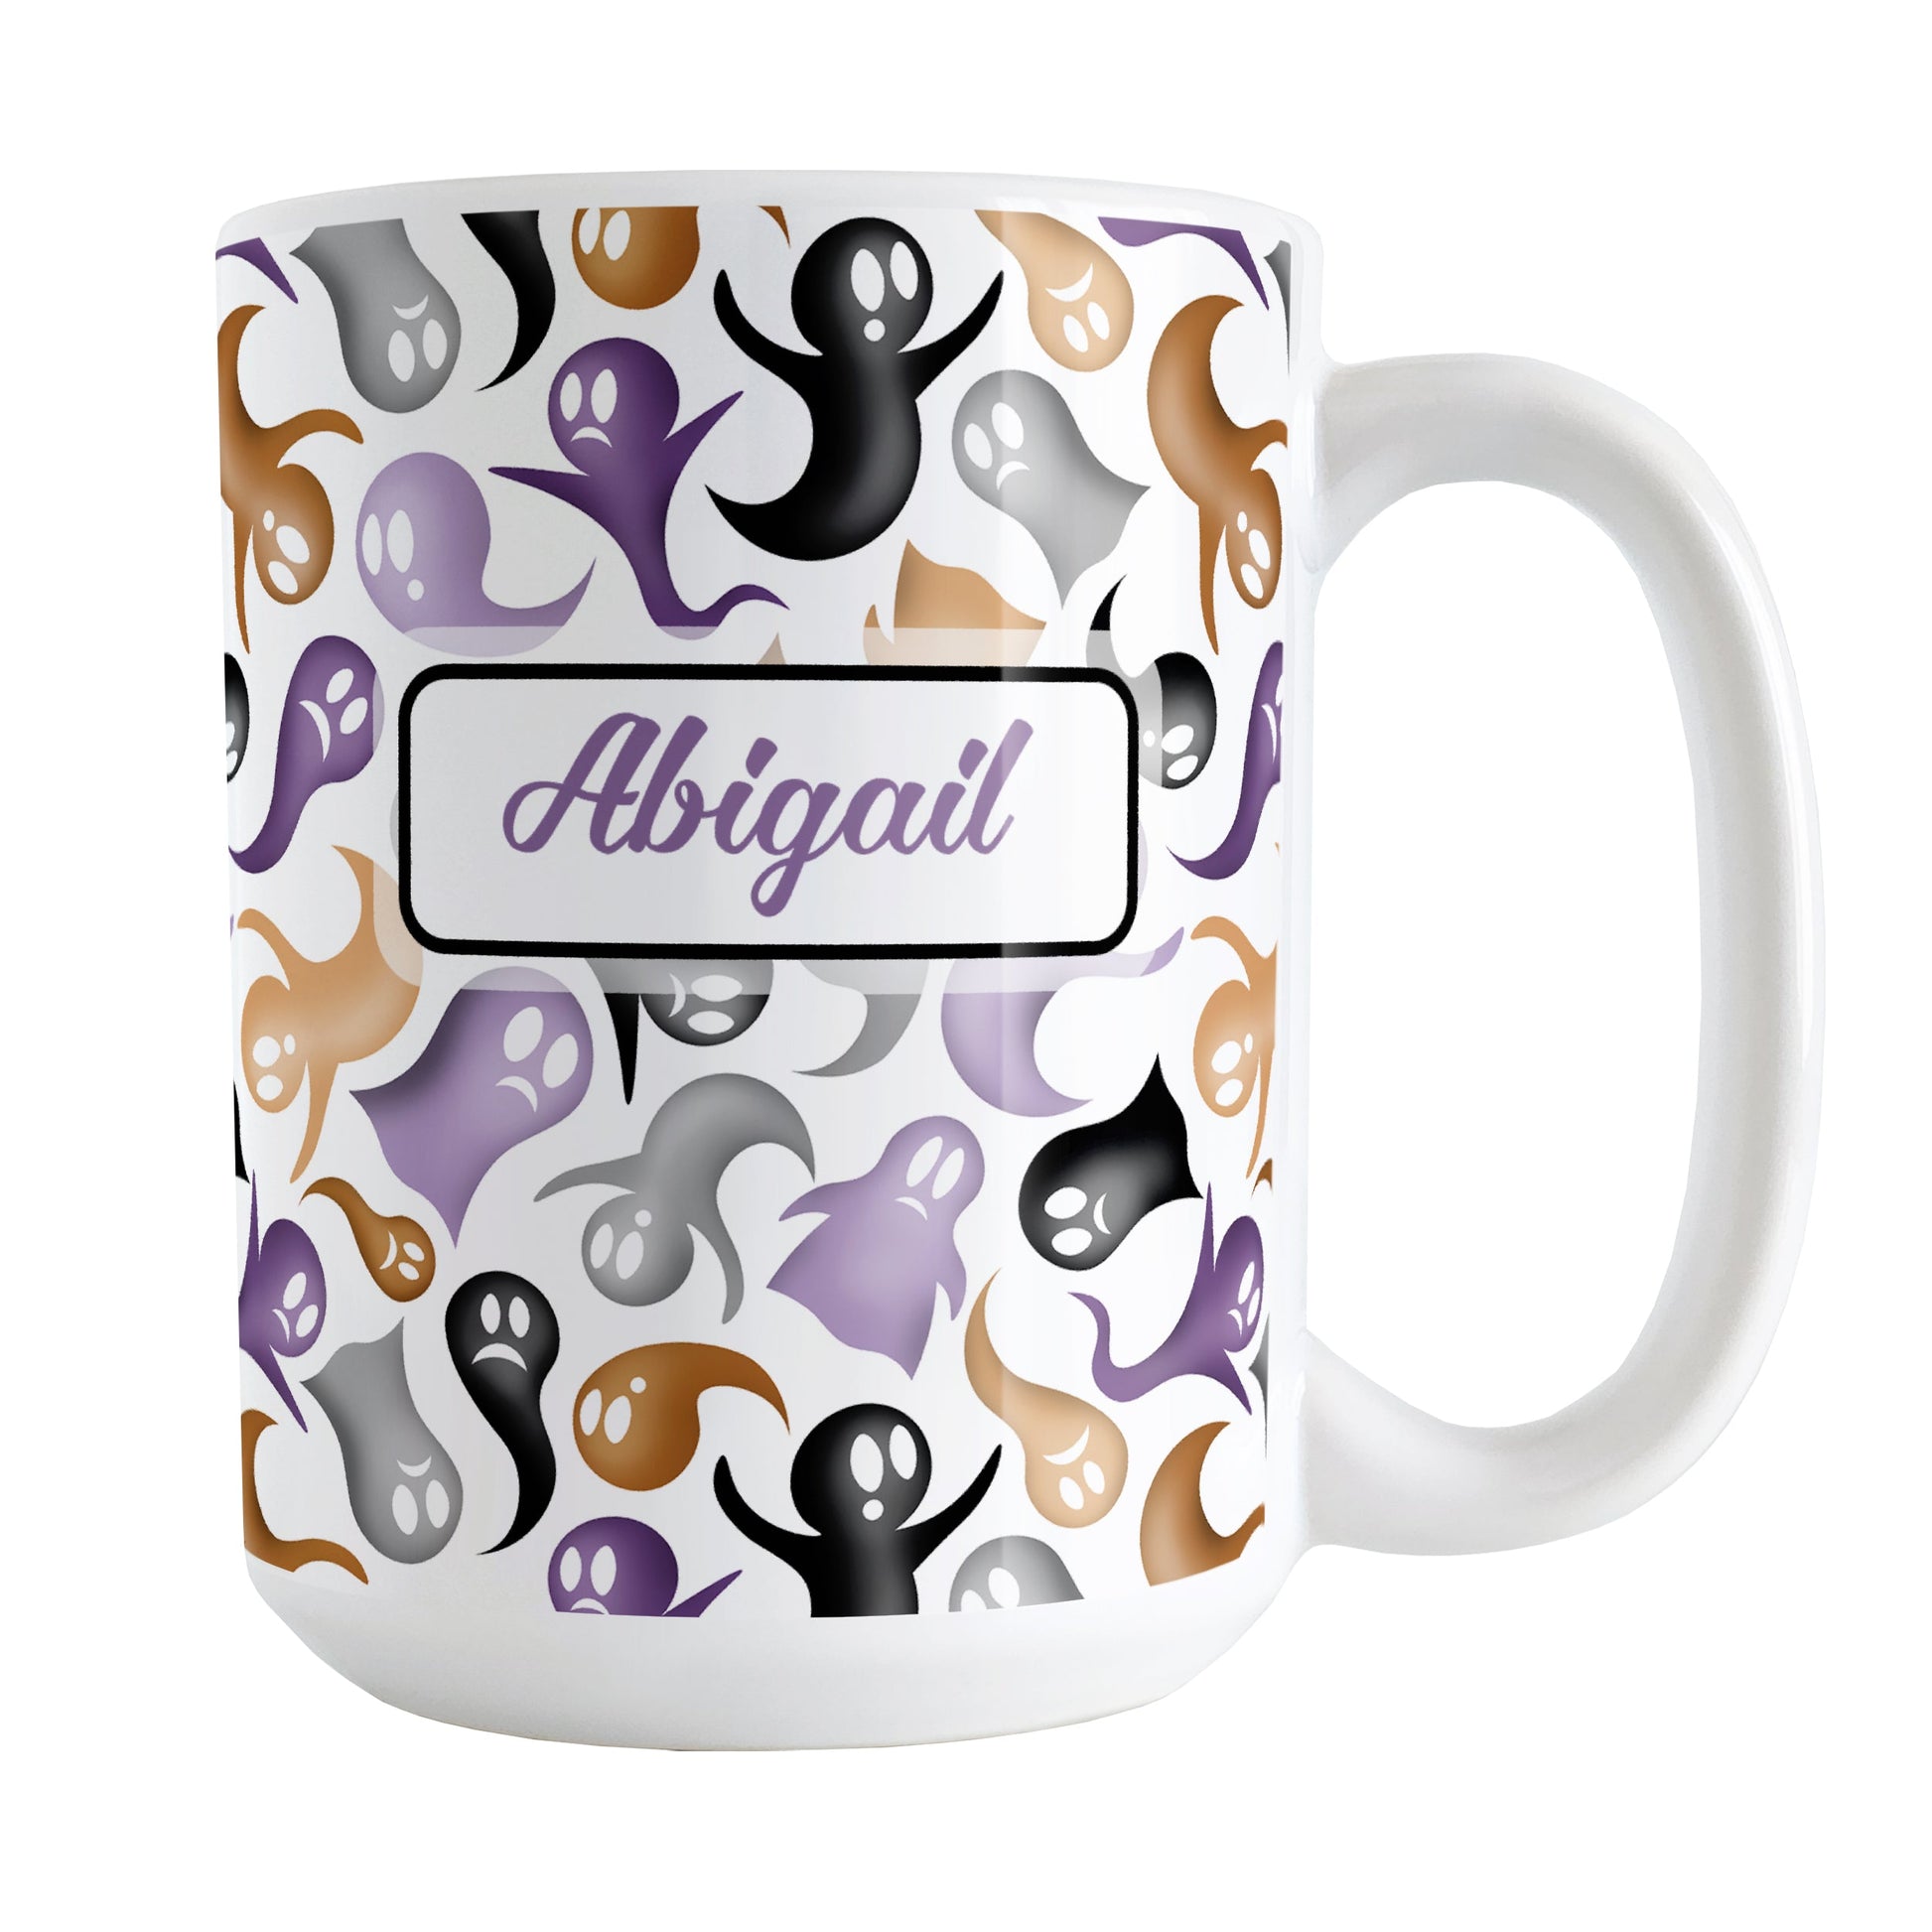 Personalized Ghosts and Spirits Halloween Mug (15oz) at Amy's Coffee Mugs. A ceramic coffee mug designed with a whimsical pattern of purple, orange, black and gray ghosts and spirits that wraps around the mug to the handle. Your personalized name is custom printed in a purple script font on both sides of the mug over the Halloween pattern.